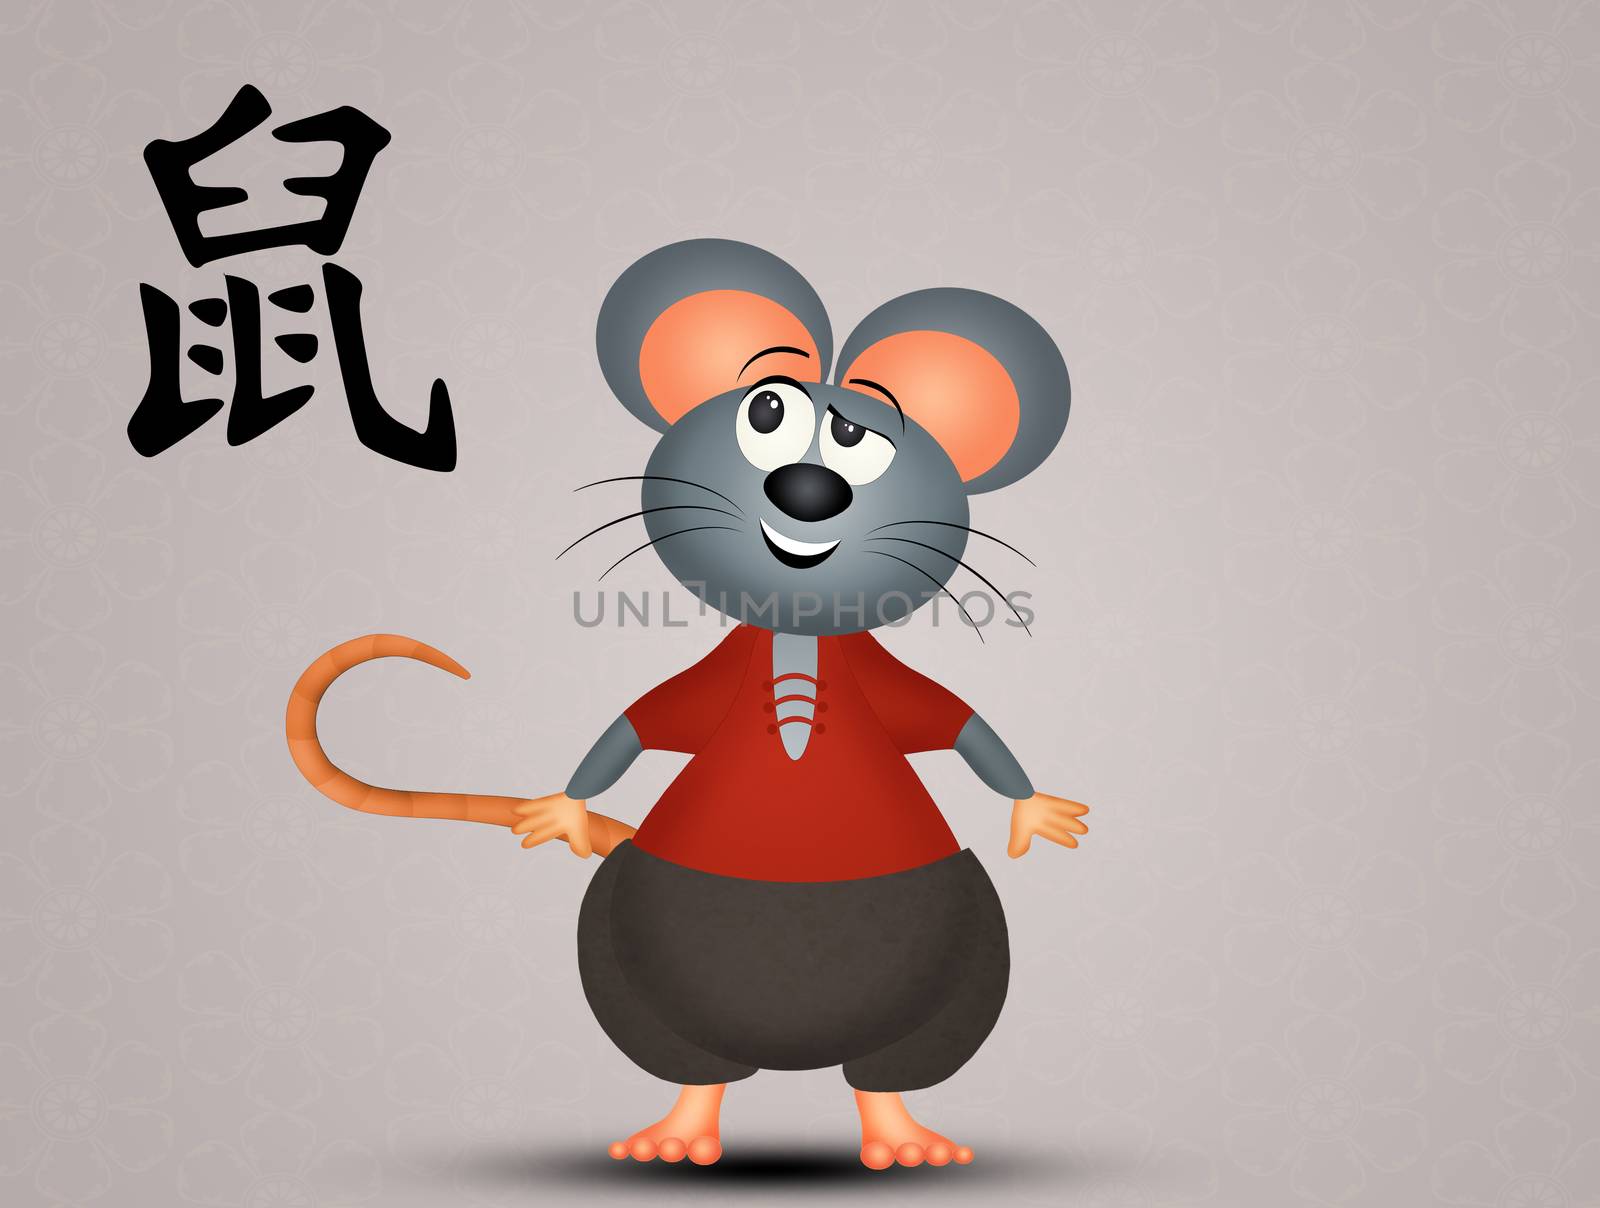 traditional Chinese Year of the rat by adrenalina